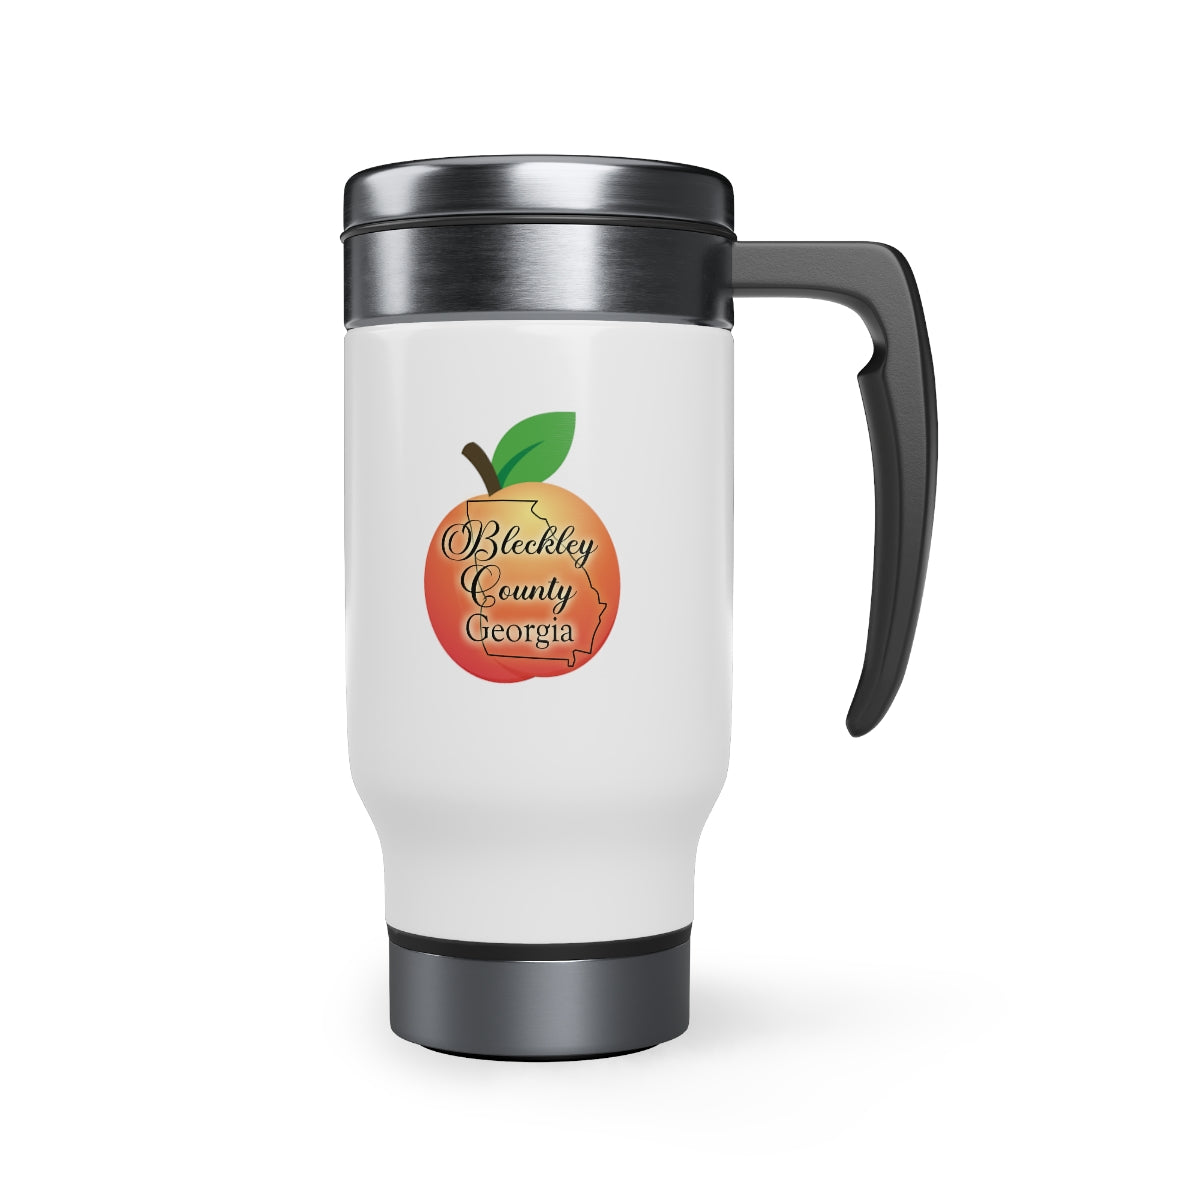 Bleckley County Georgia Stainless Steel Travel Mug with Handle, 14oz